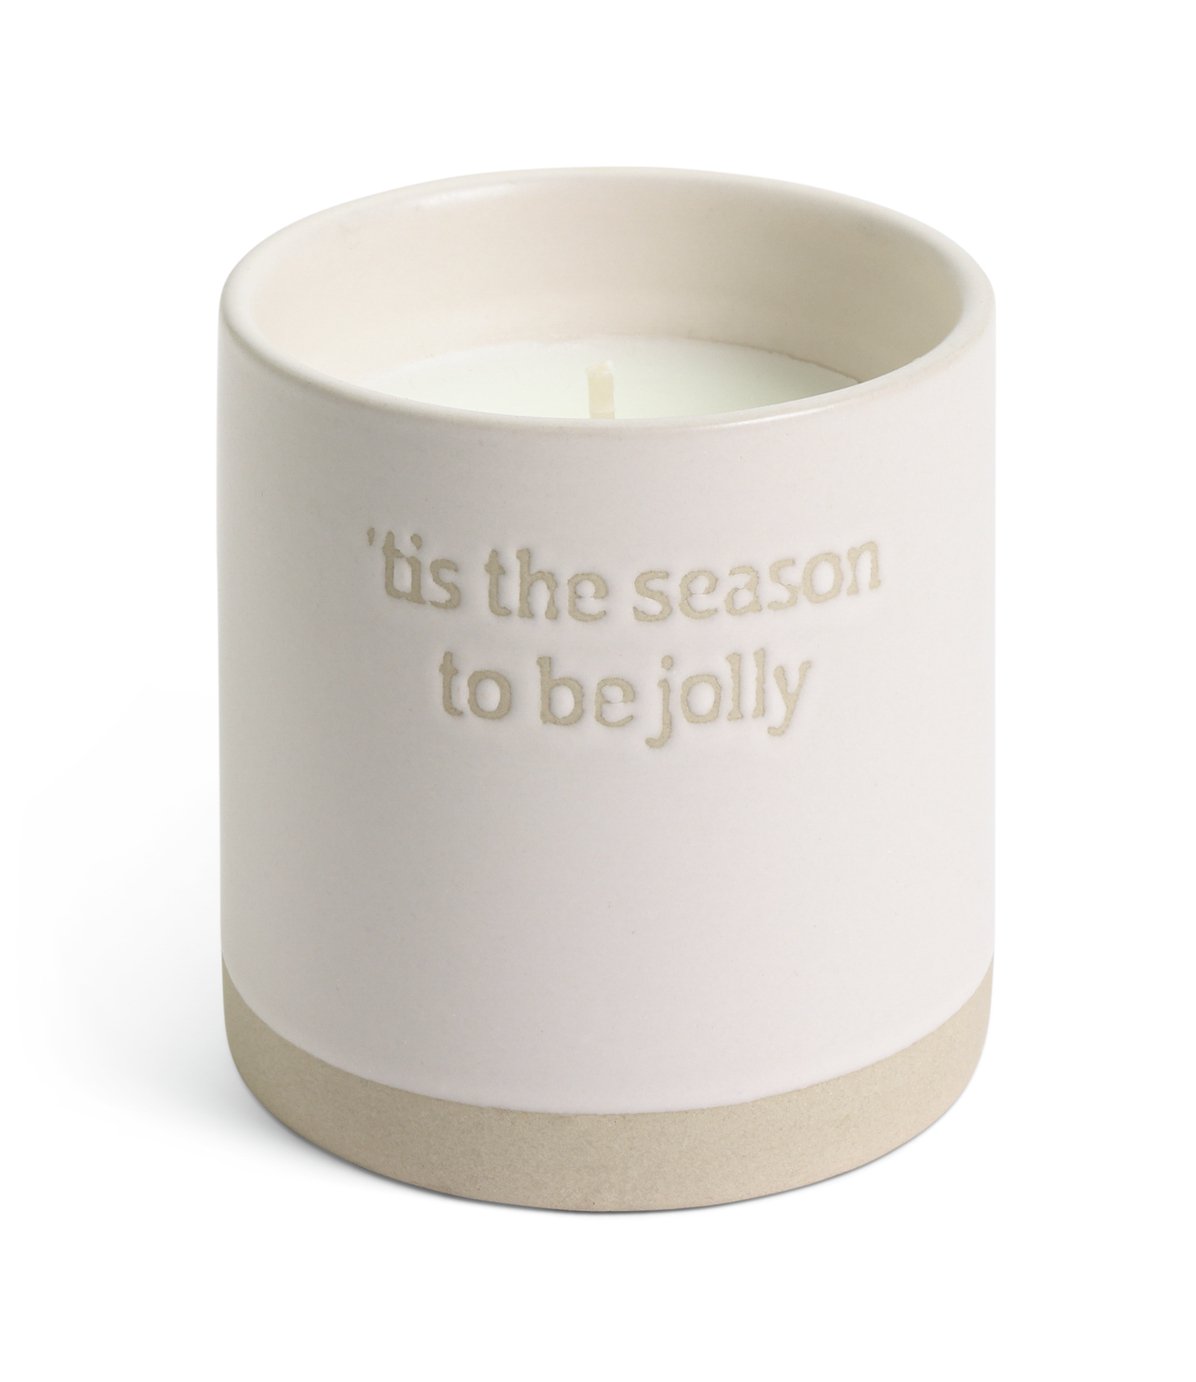 Habitat Small Ceramic Candle with Quote - Fir Balsam